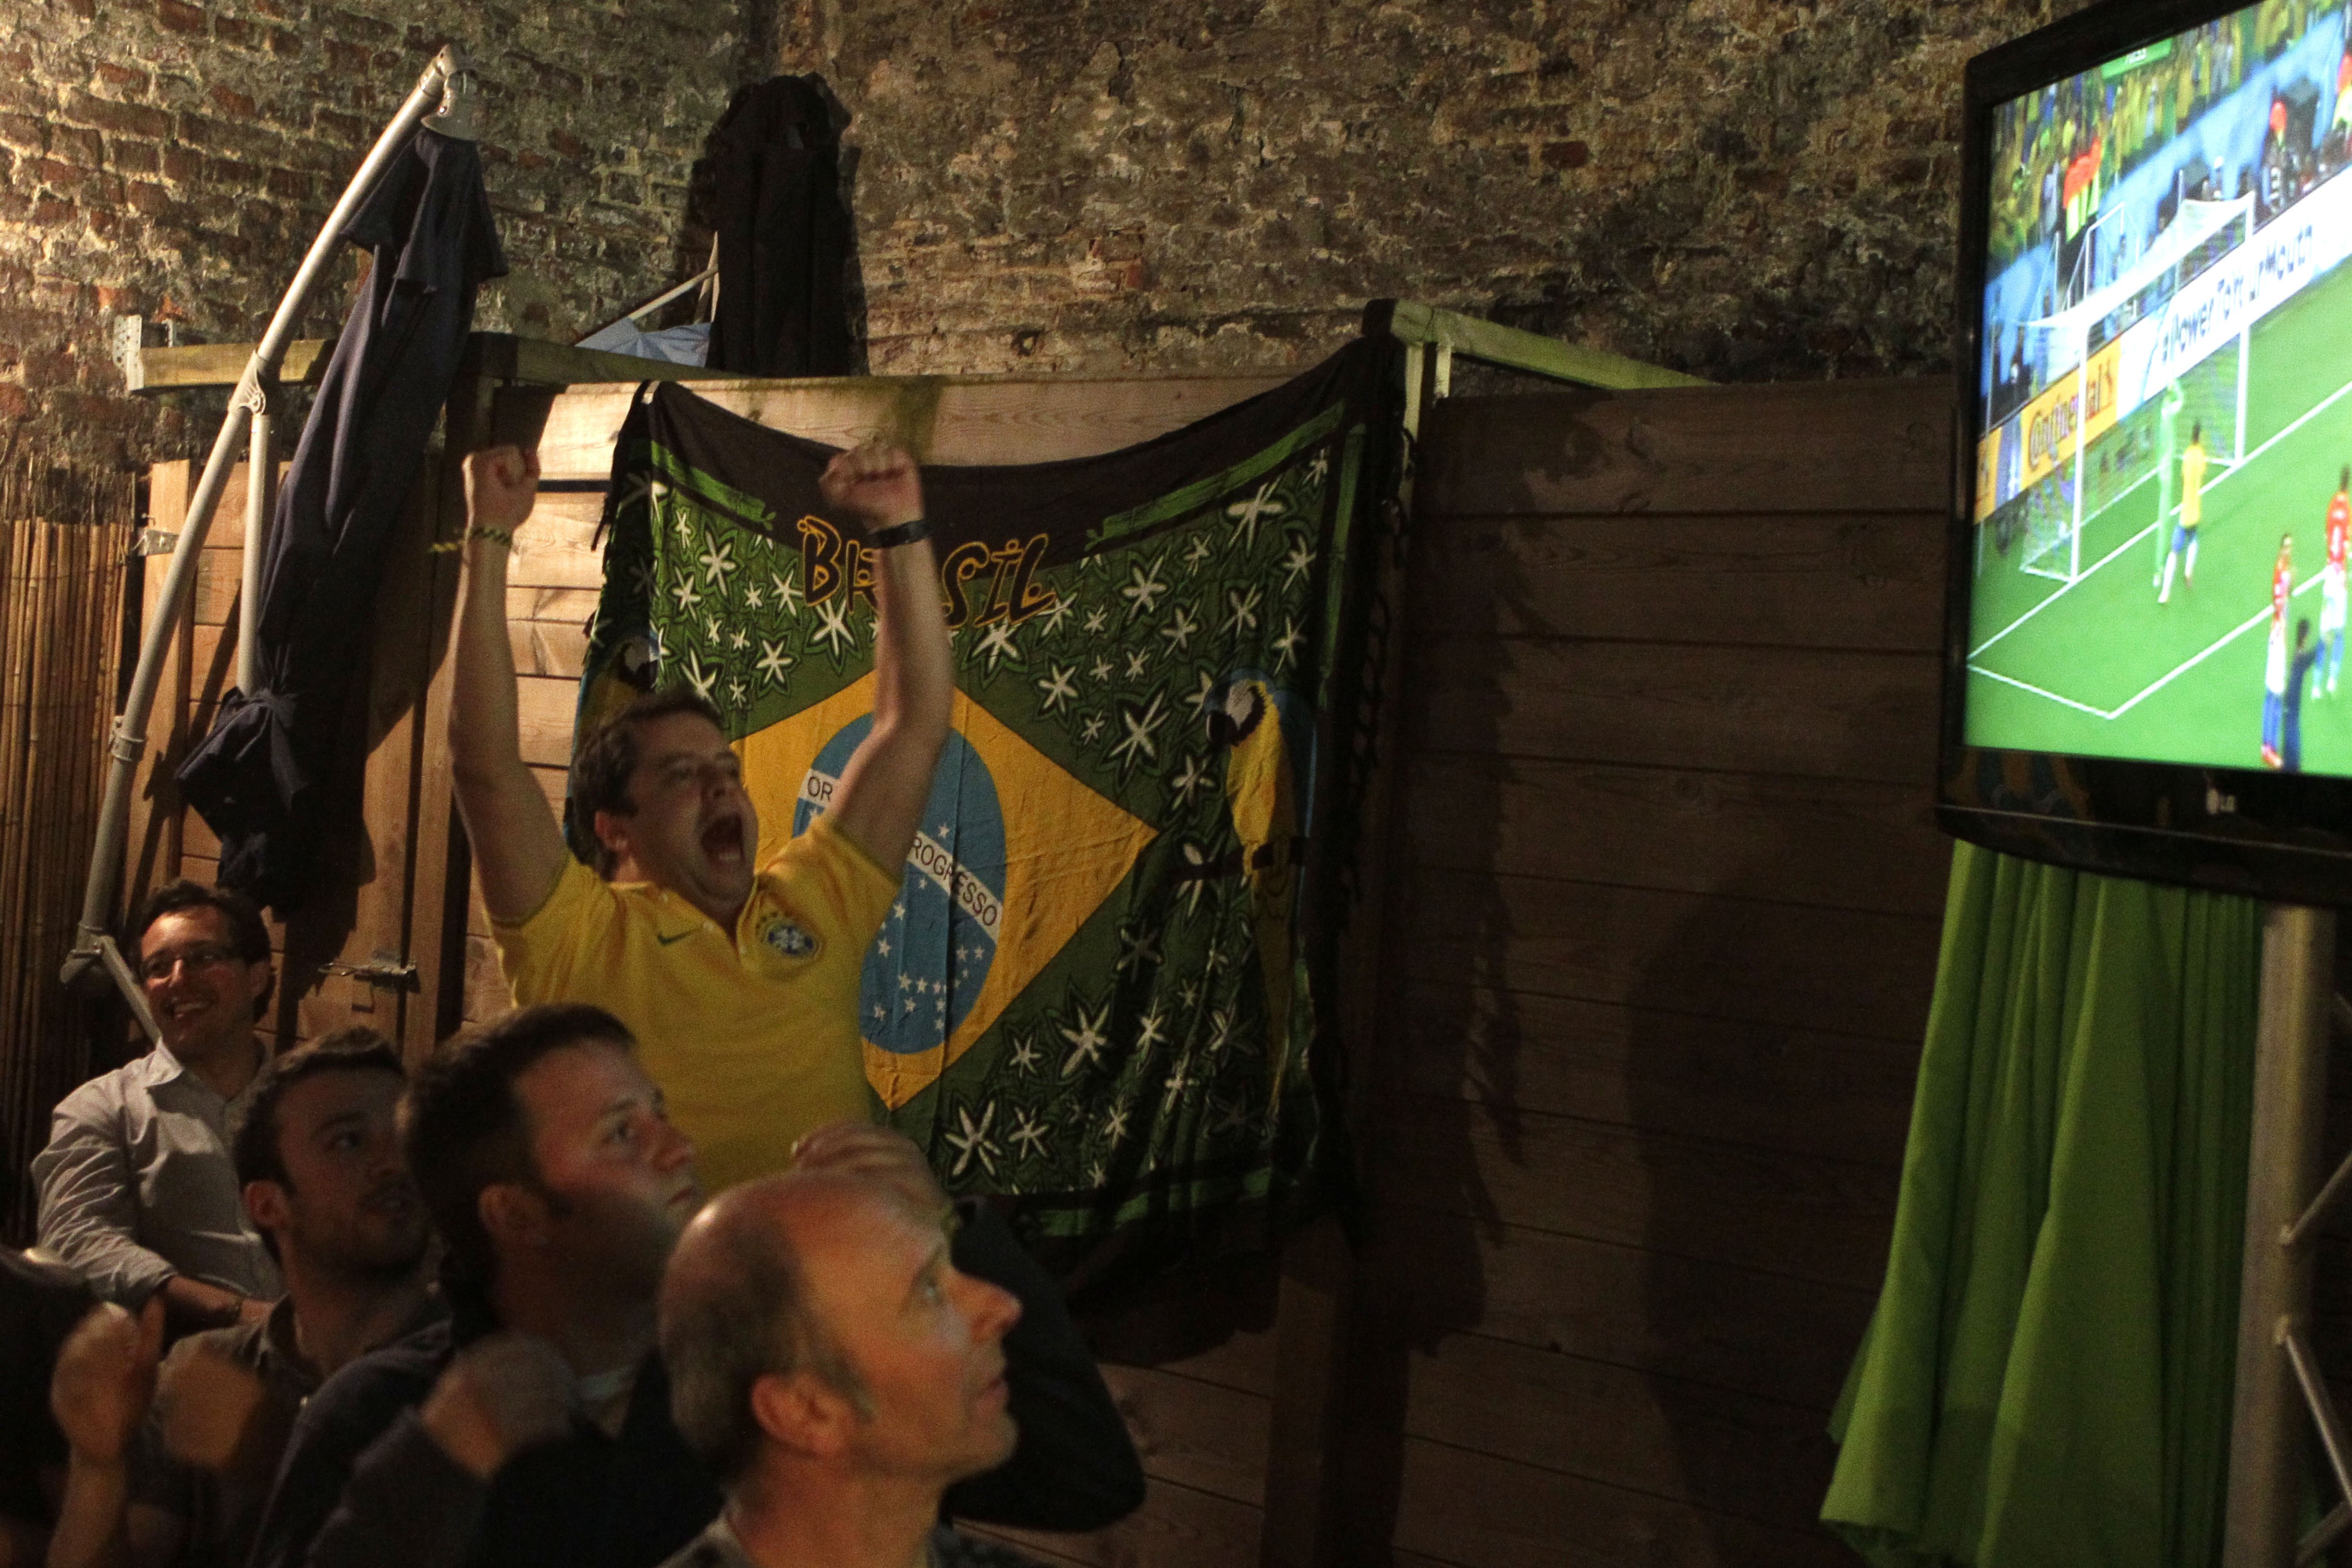 Brazil soccer fan reacts after the second goal for Brazil during the first 2014 World Cup soccer match between Brazil and Croatia, in a restaurant in Lille, northern France on  June 12, 2014